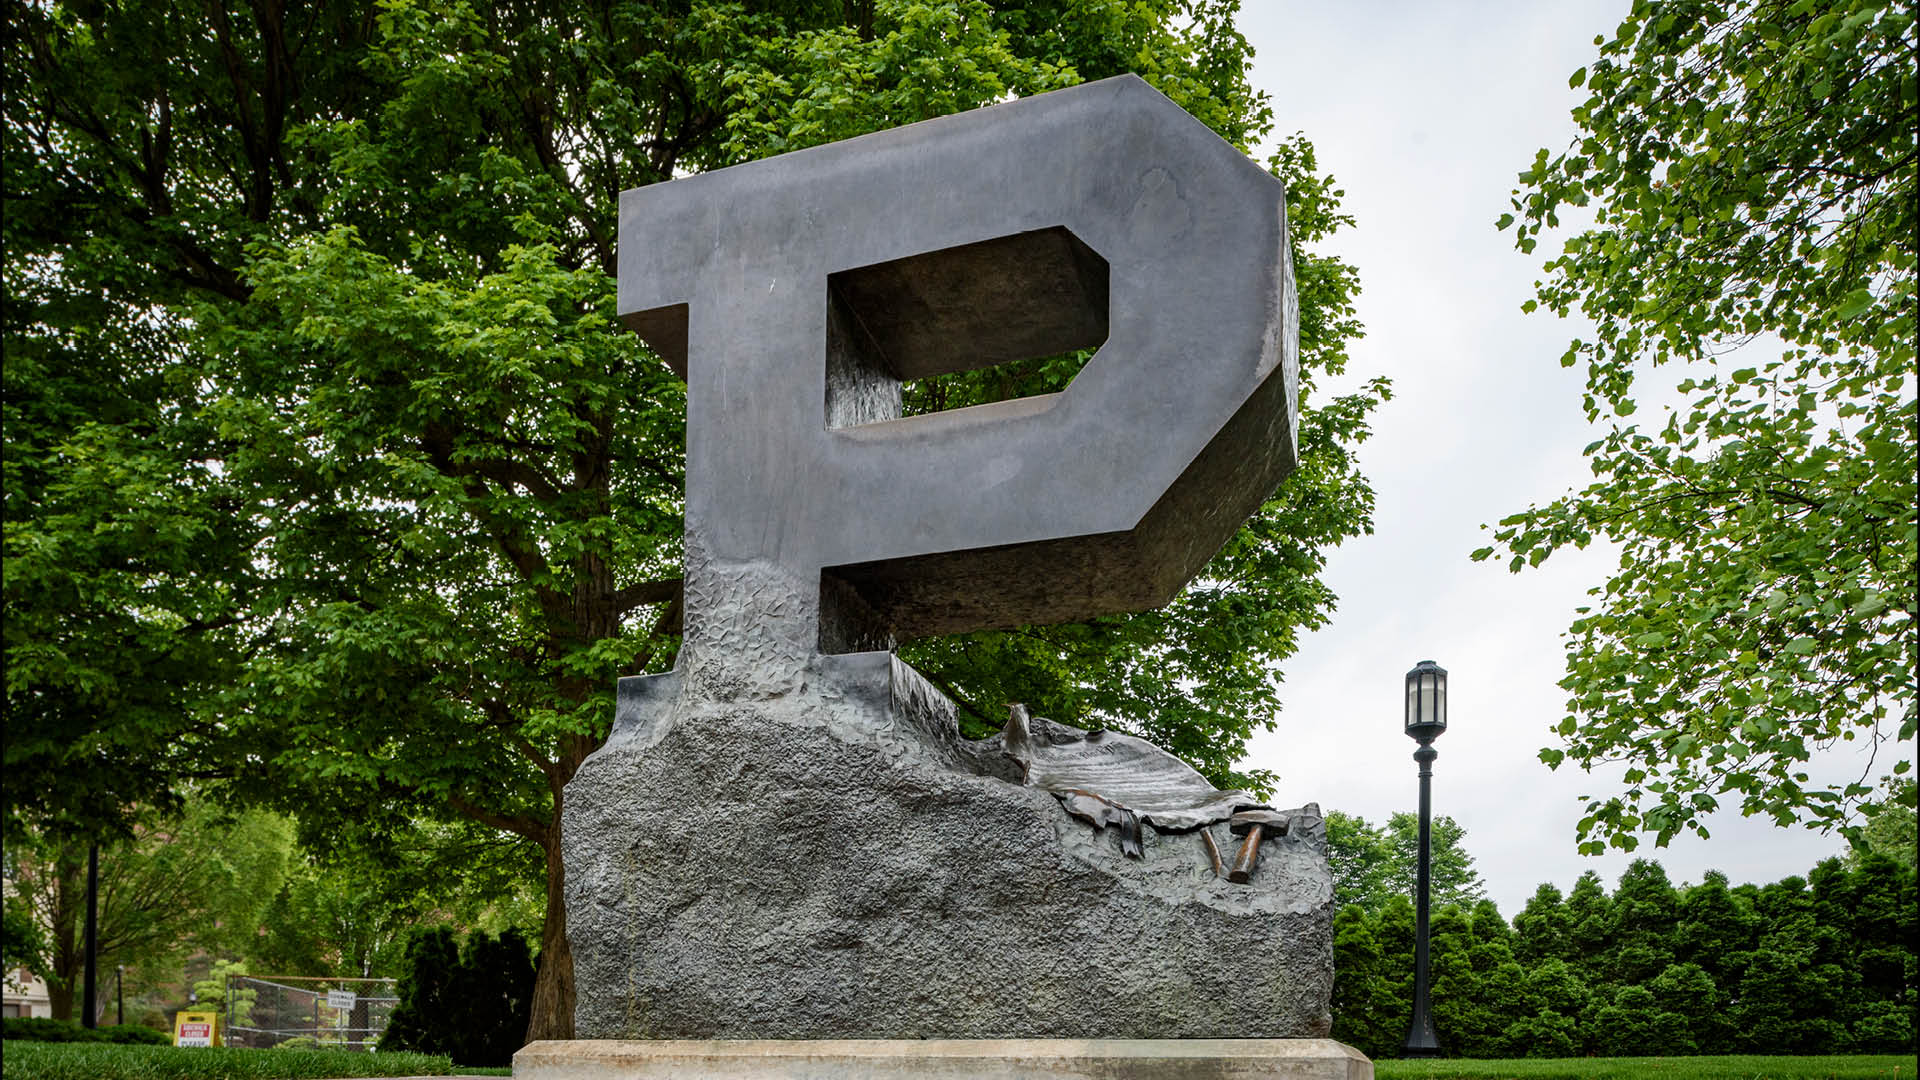 The Unfinished Block P is a bronze sculpture outside the Stewart Center on Purdue’s campus.